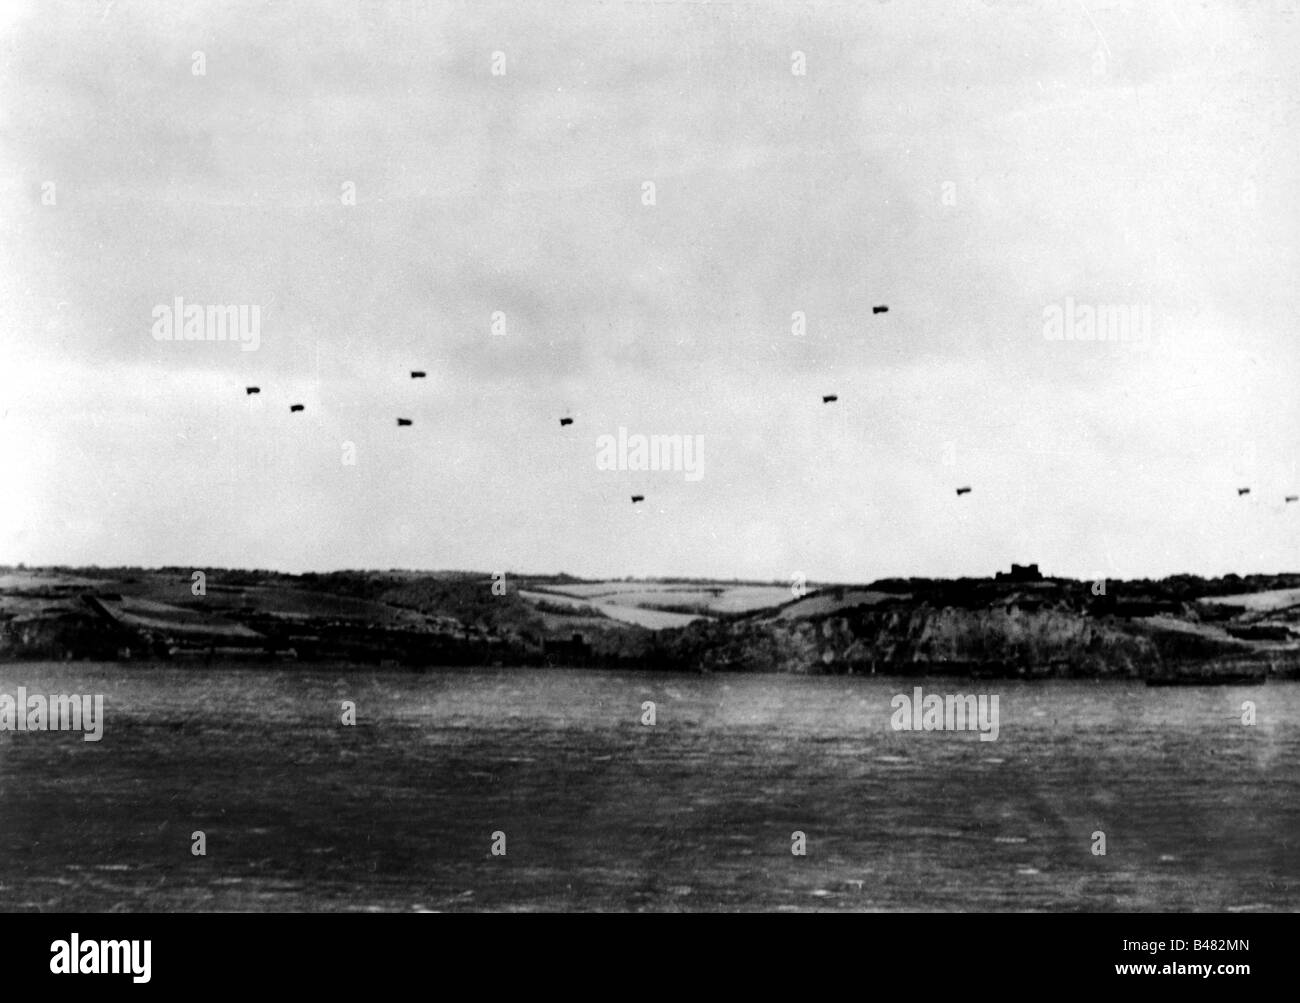 events, Second World War / WWII, aerial warfare, England, English coast near Dover with barrage balloons, photo taken by a German war correspondent with a telephote at the French coast, 1940, Stock Photo